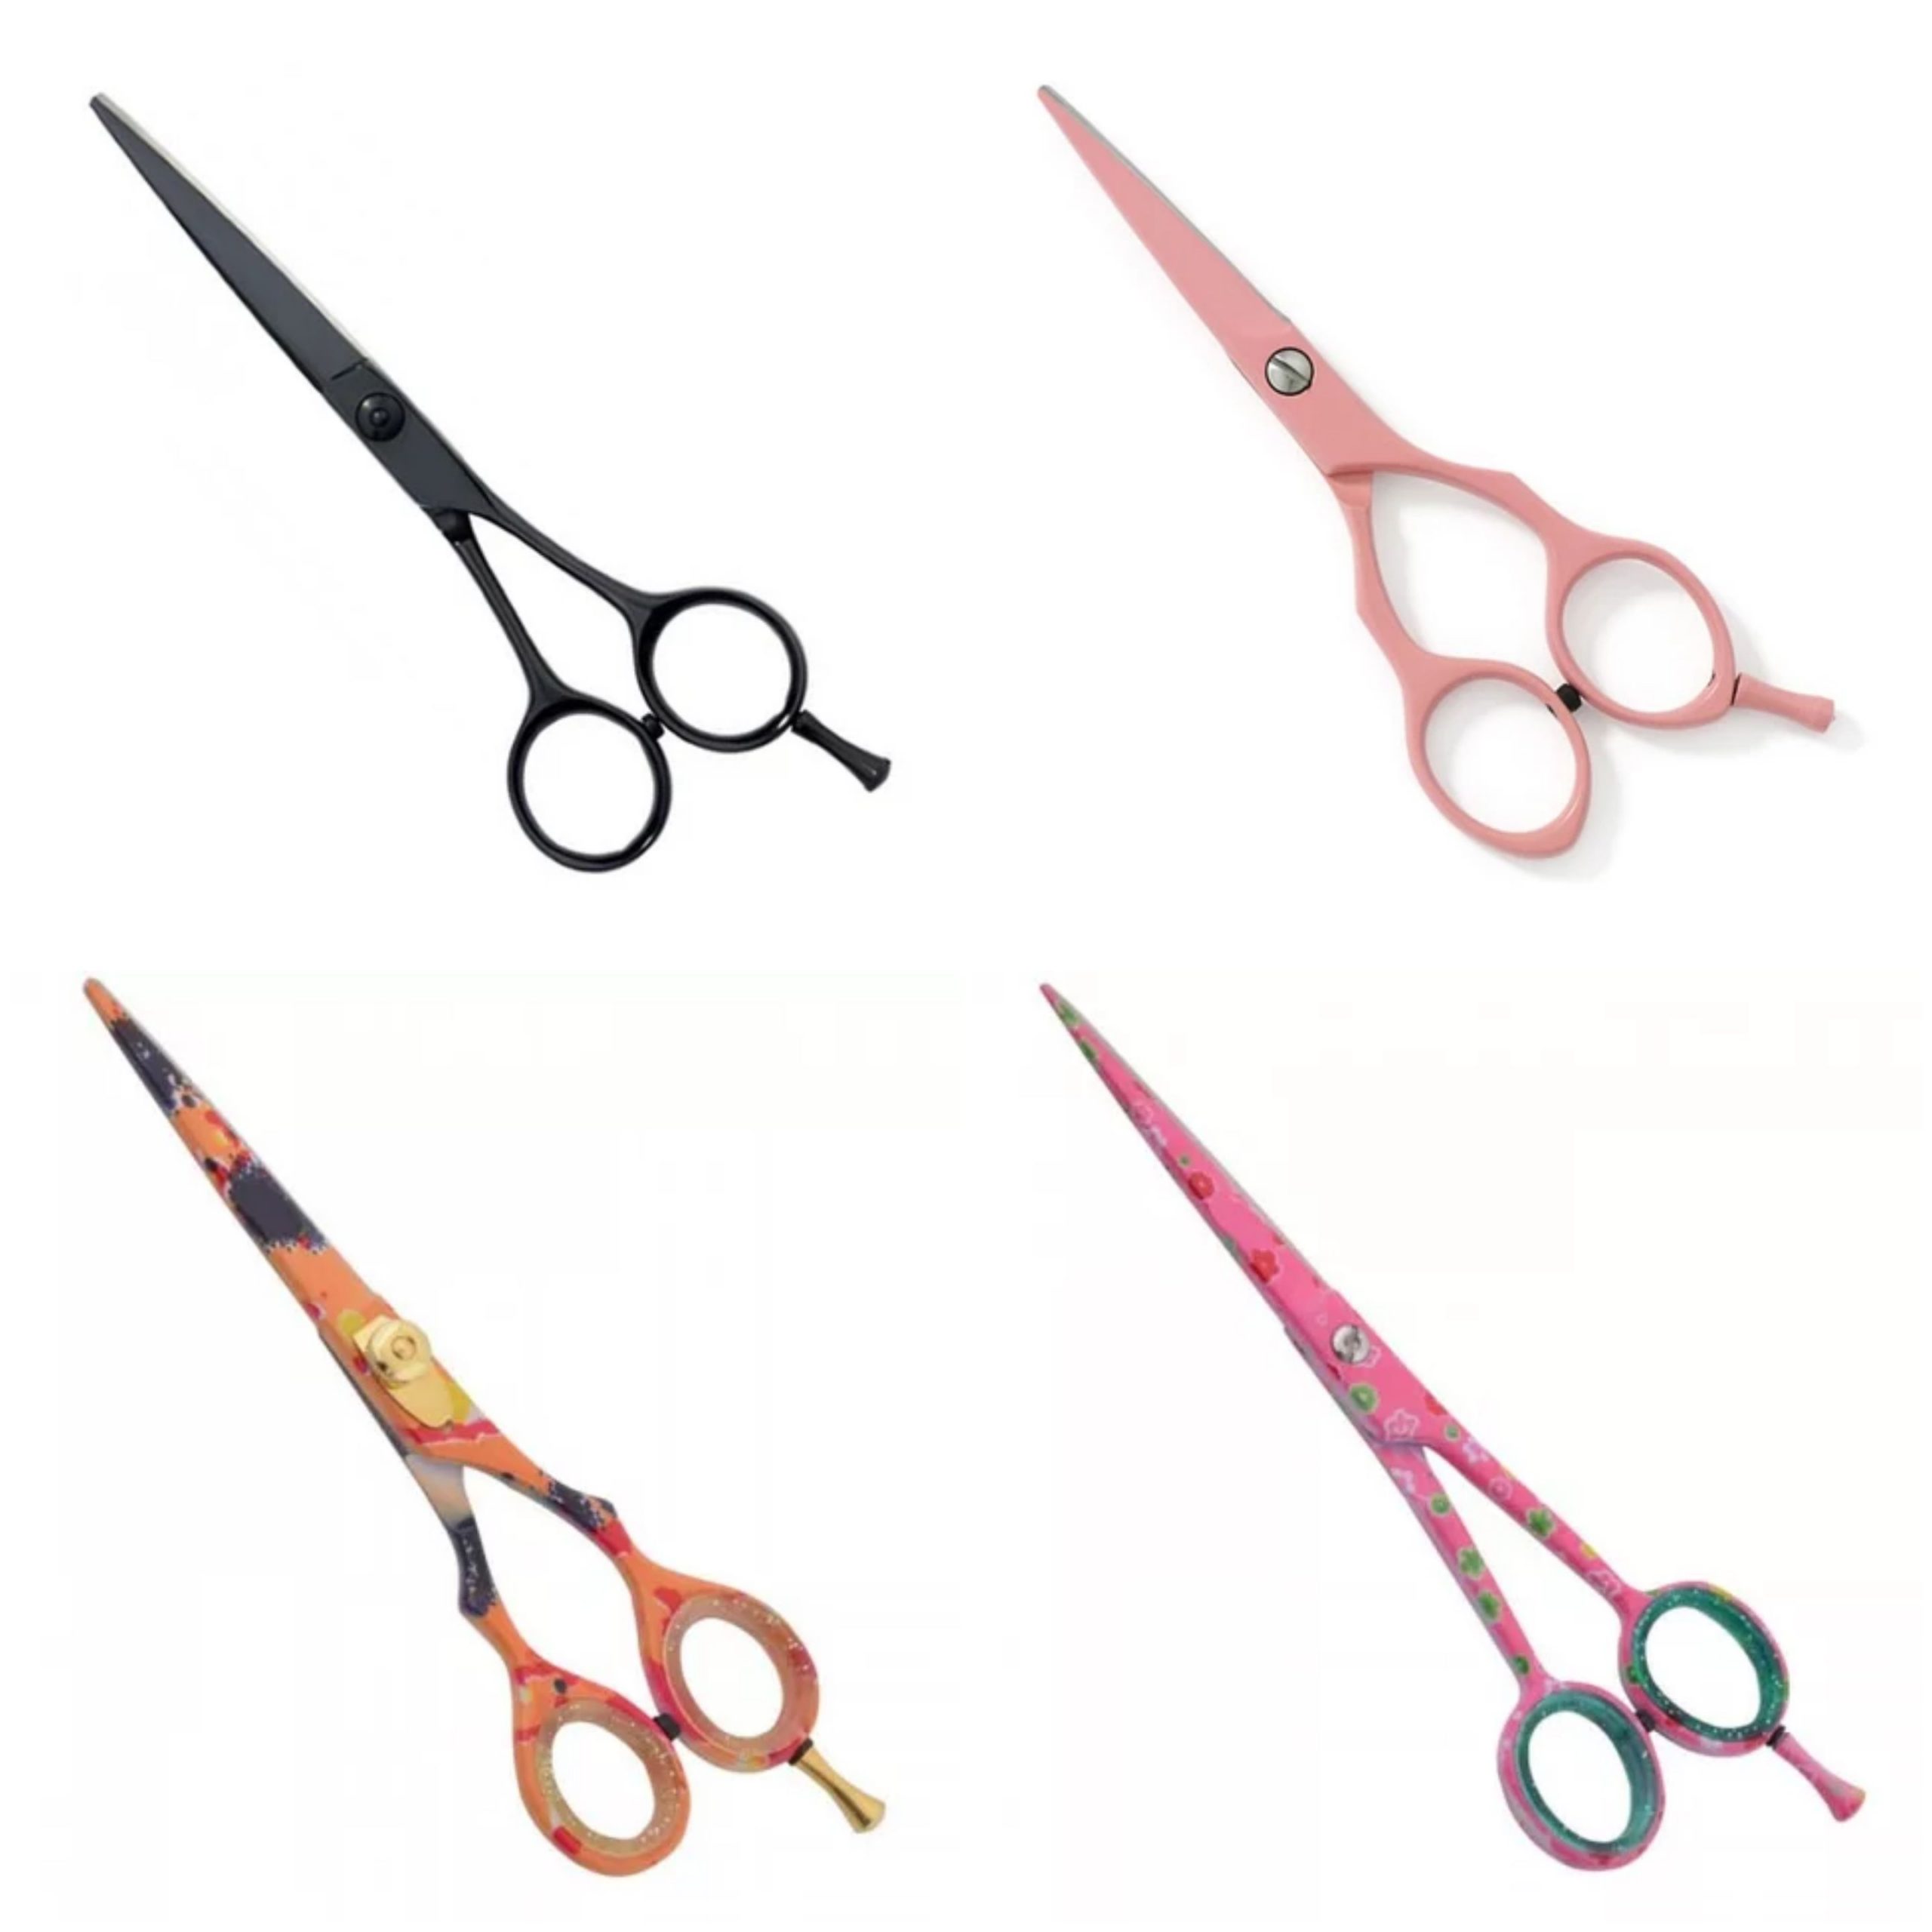 #3803 Barber Hair Saloon Professional Hairdressing Hair Cutting Shears with Unique Printed Designs